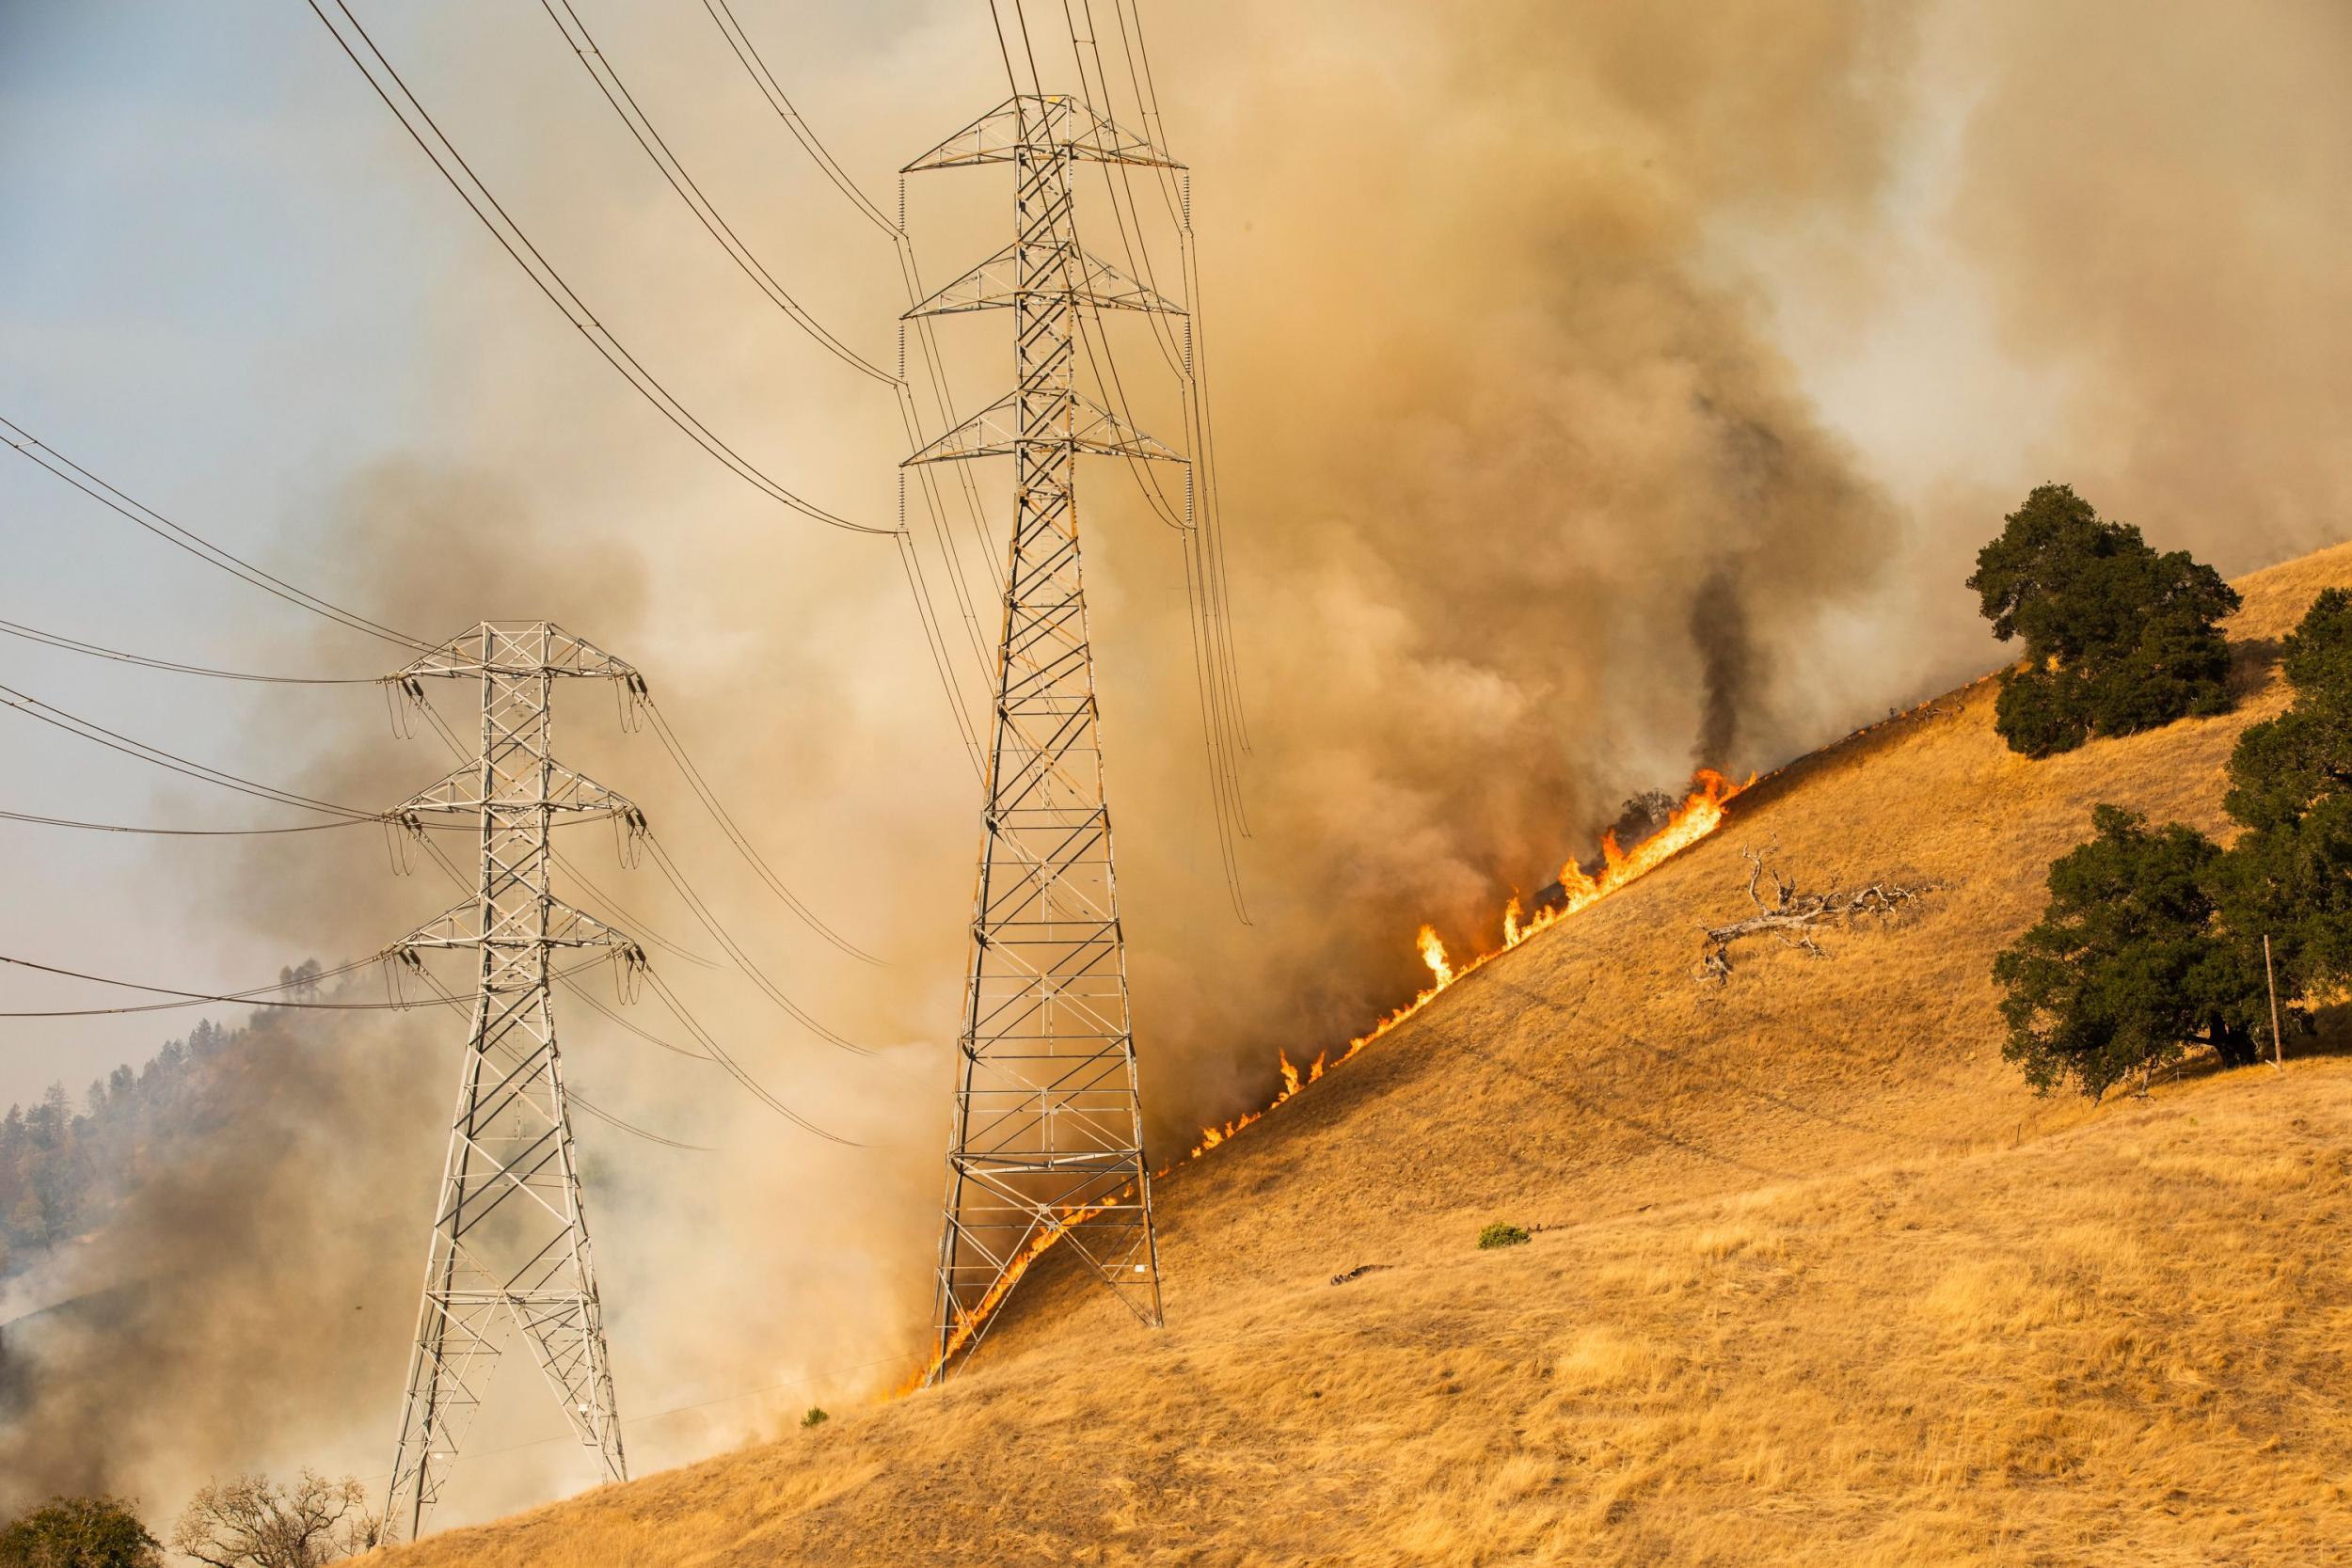 PG&amp;E is?shutting off parts of the power network to try to stop the fire from spreading